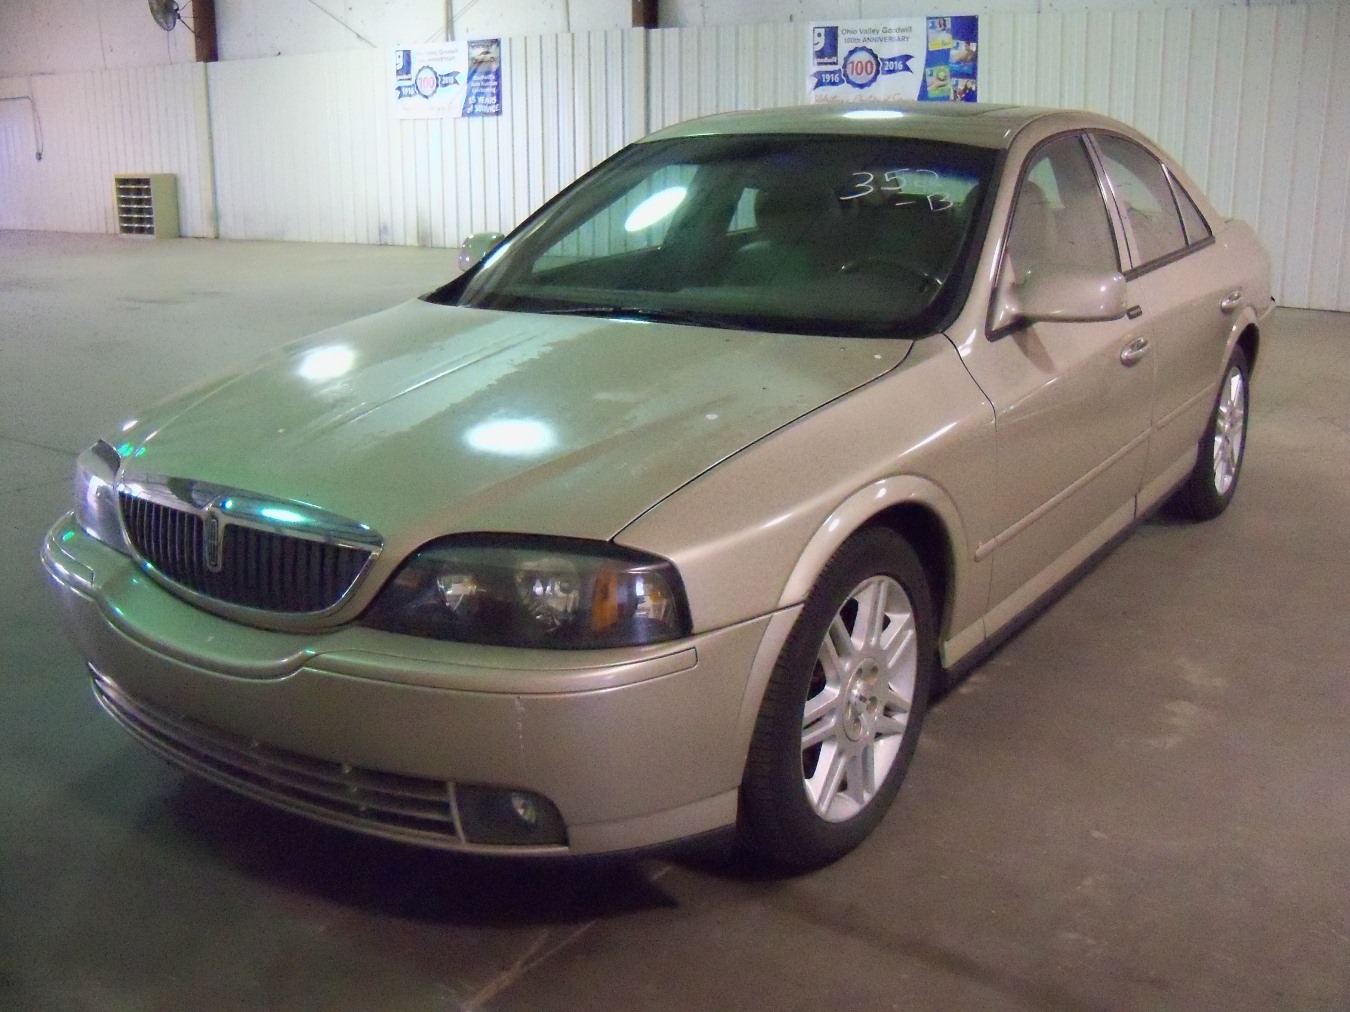 Luxury Lincoln LS Featured at Goodwill Auto Auction - Goodwill Auto Auction